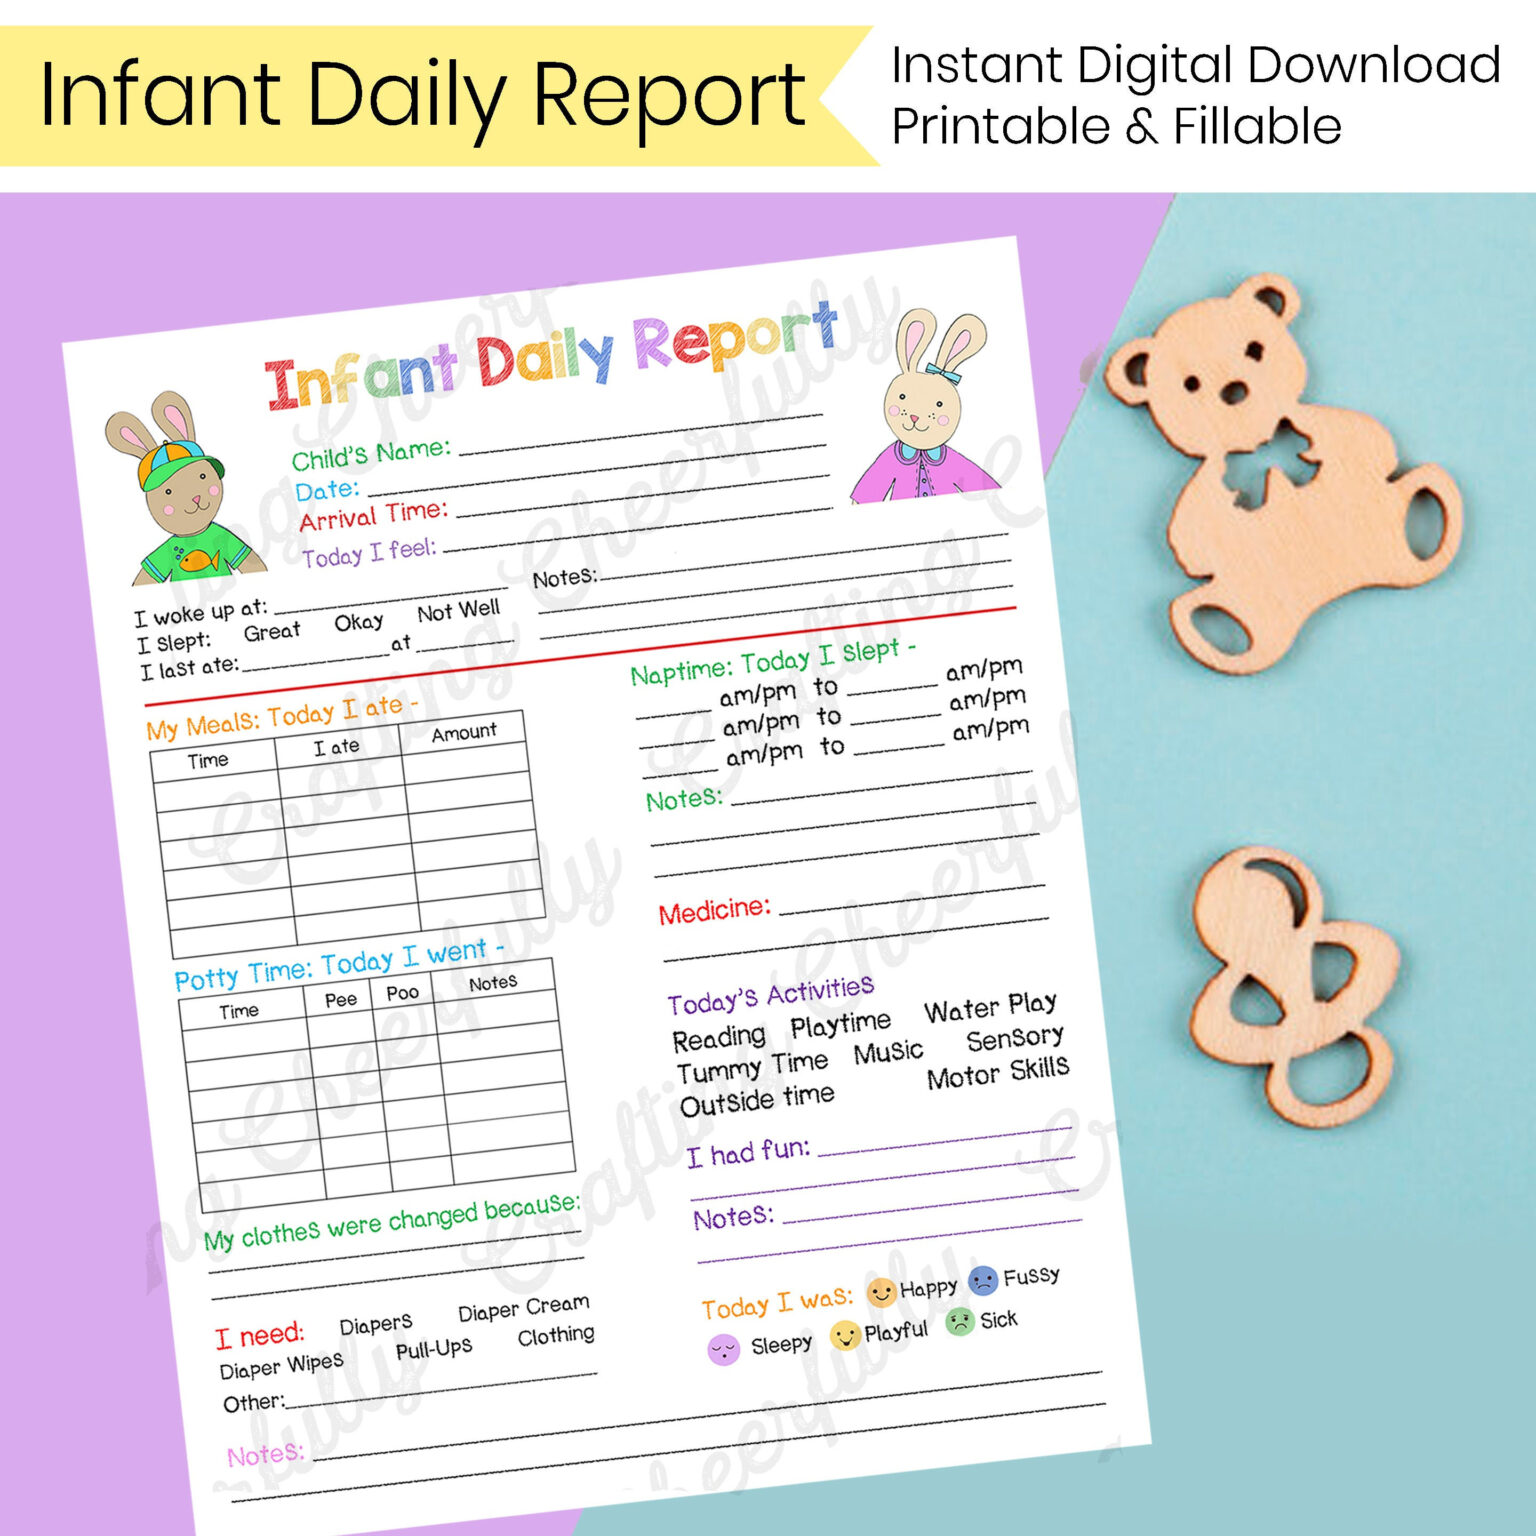 Daycare Daily Report Template